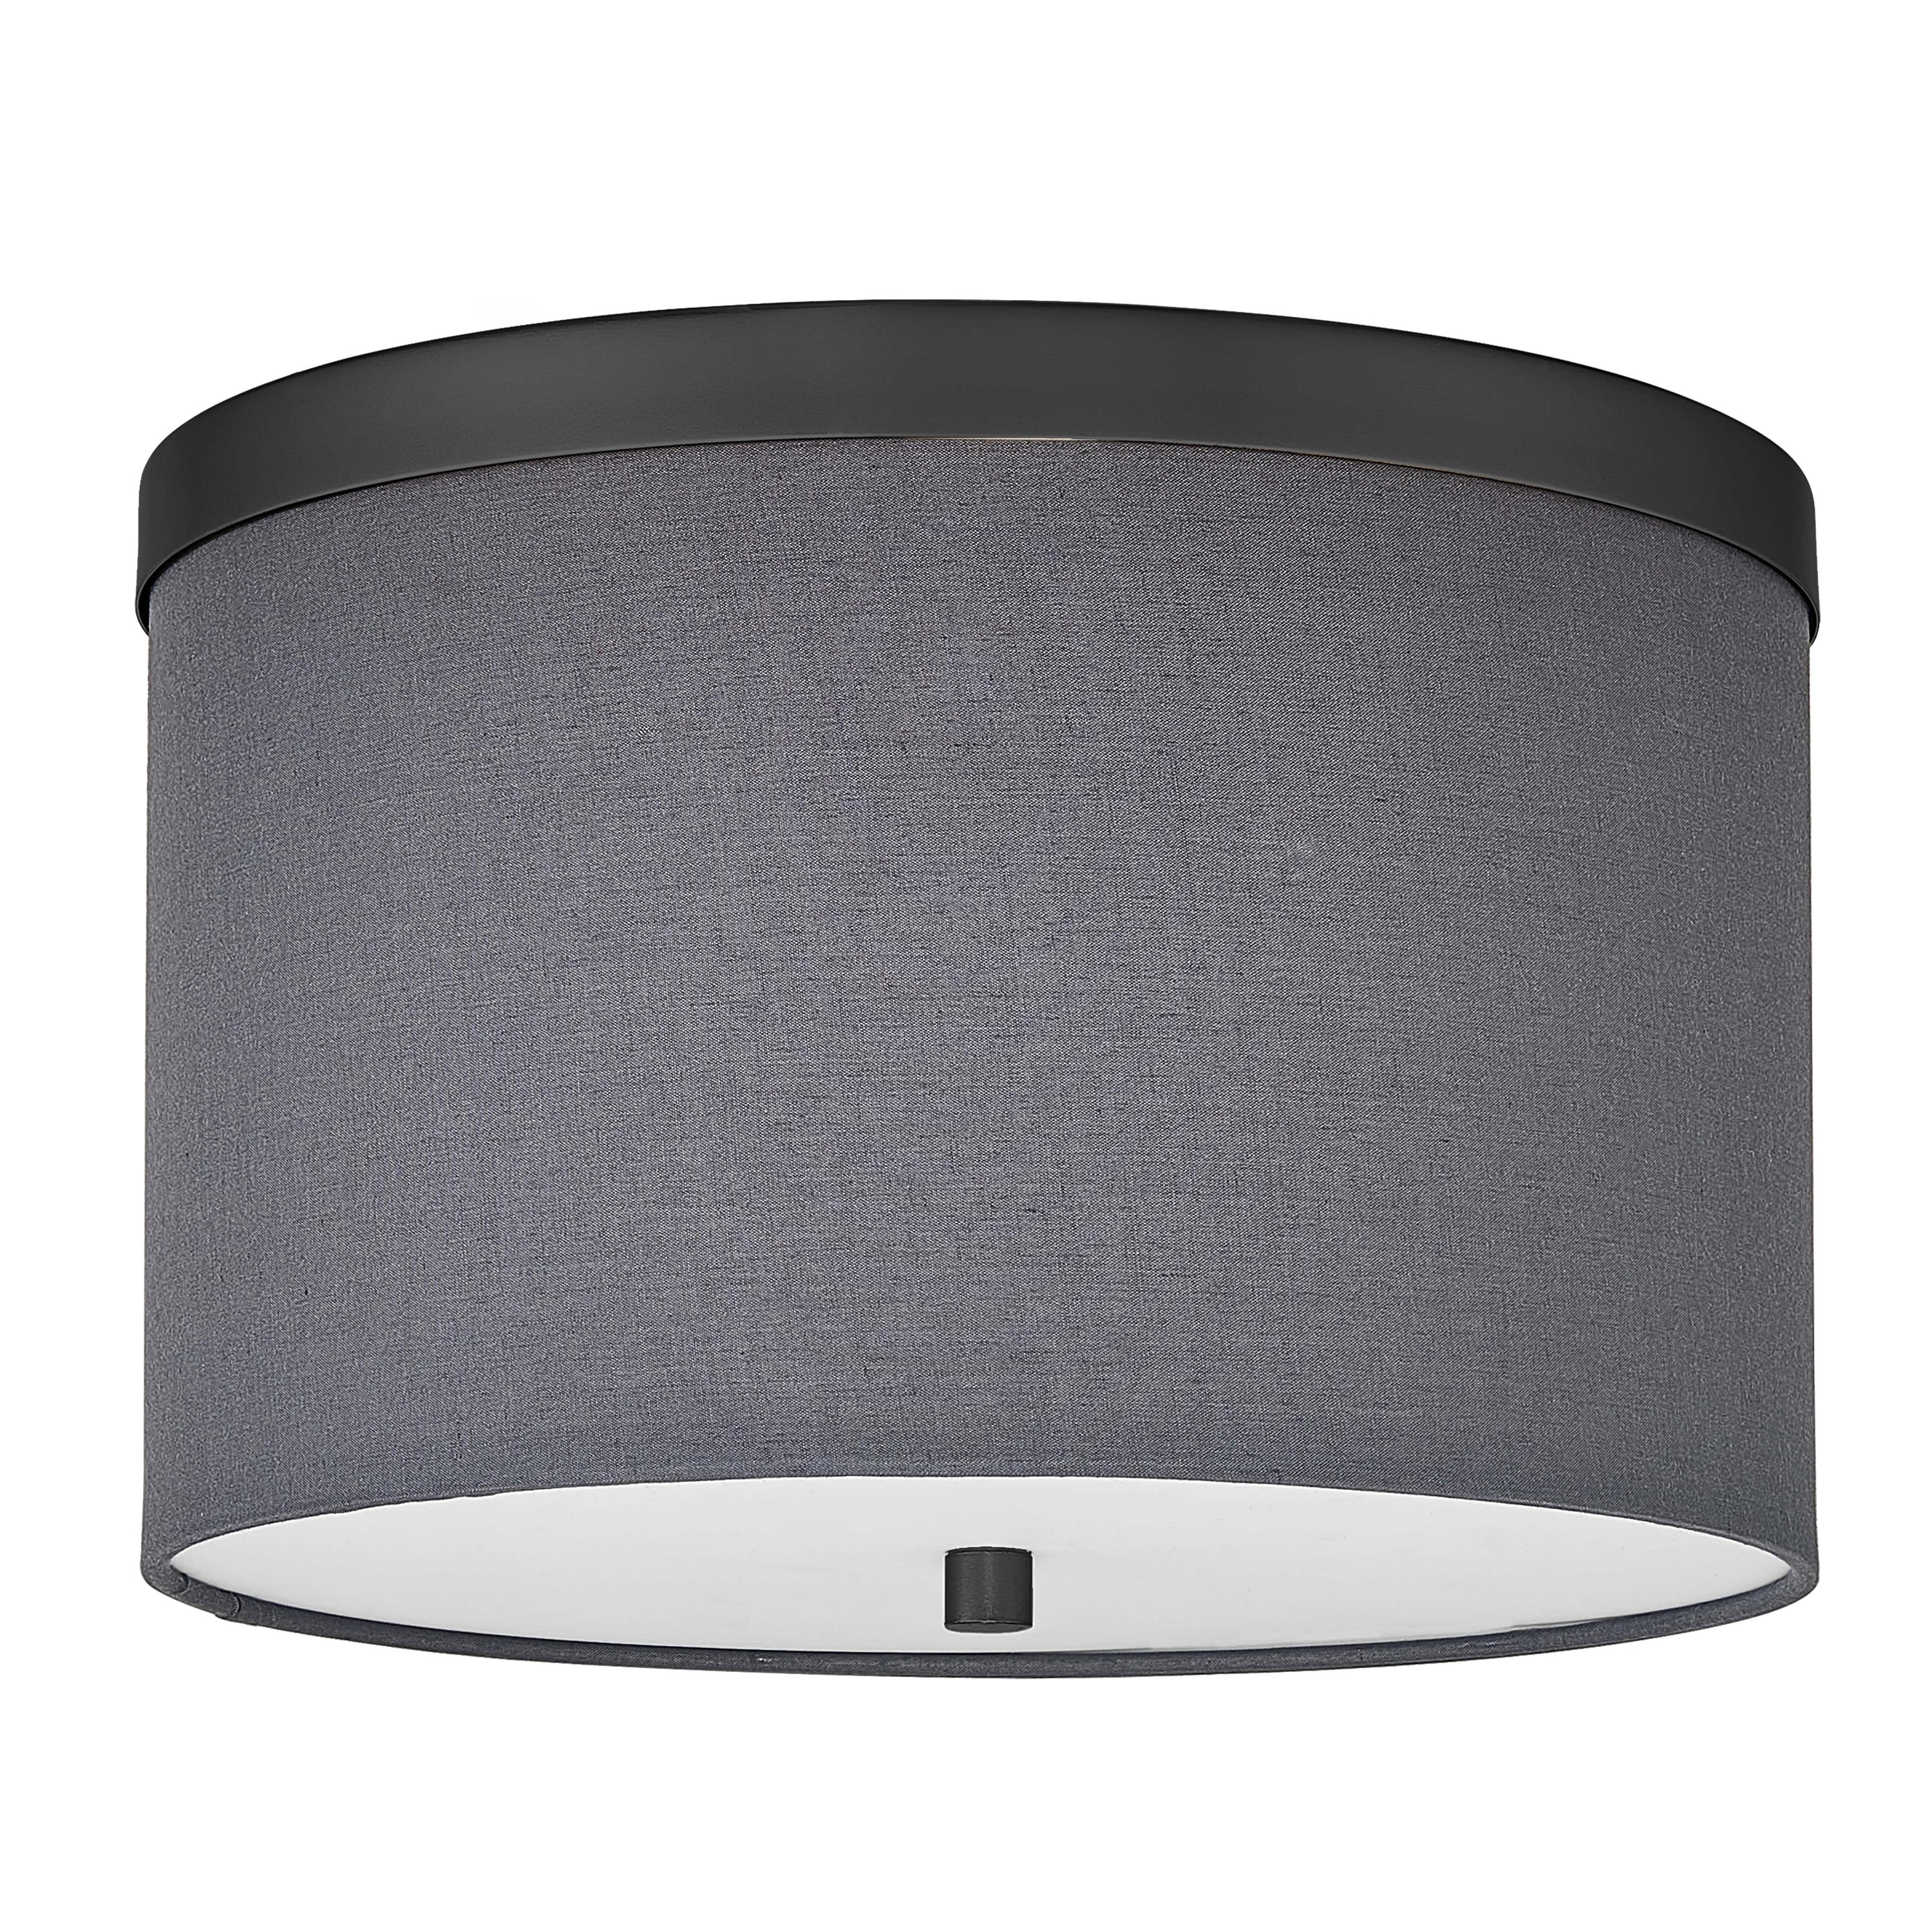 Dainolite FRD-122FH-MB-GRY 2 Light Incandescent Flush Mount Matte Black with Grey Shade